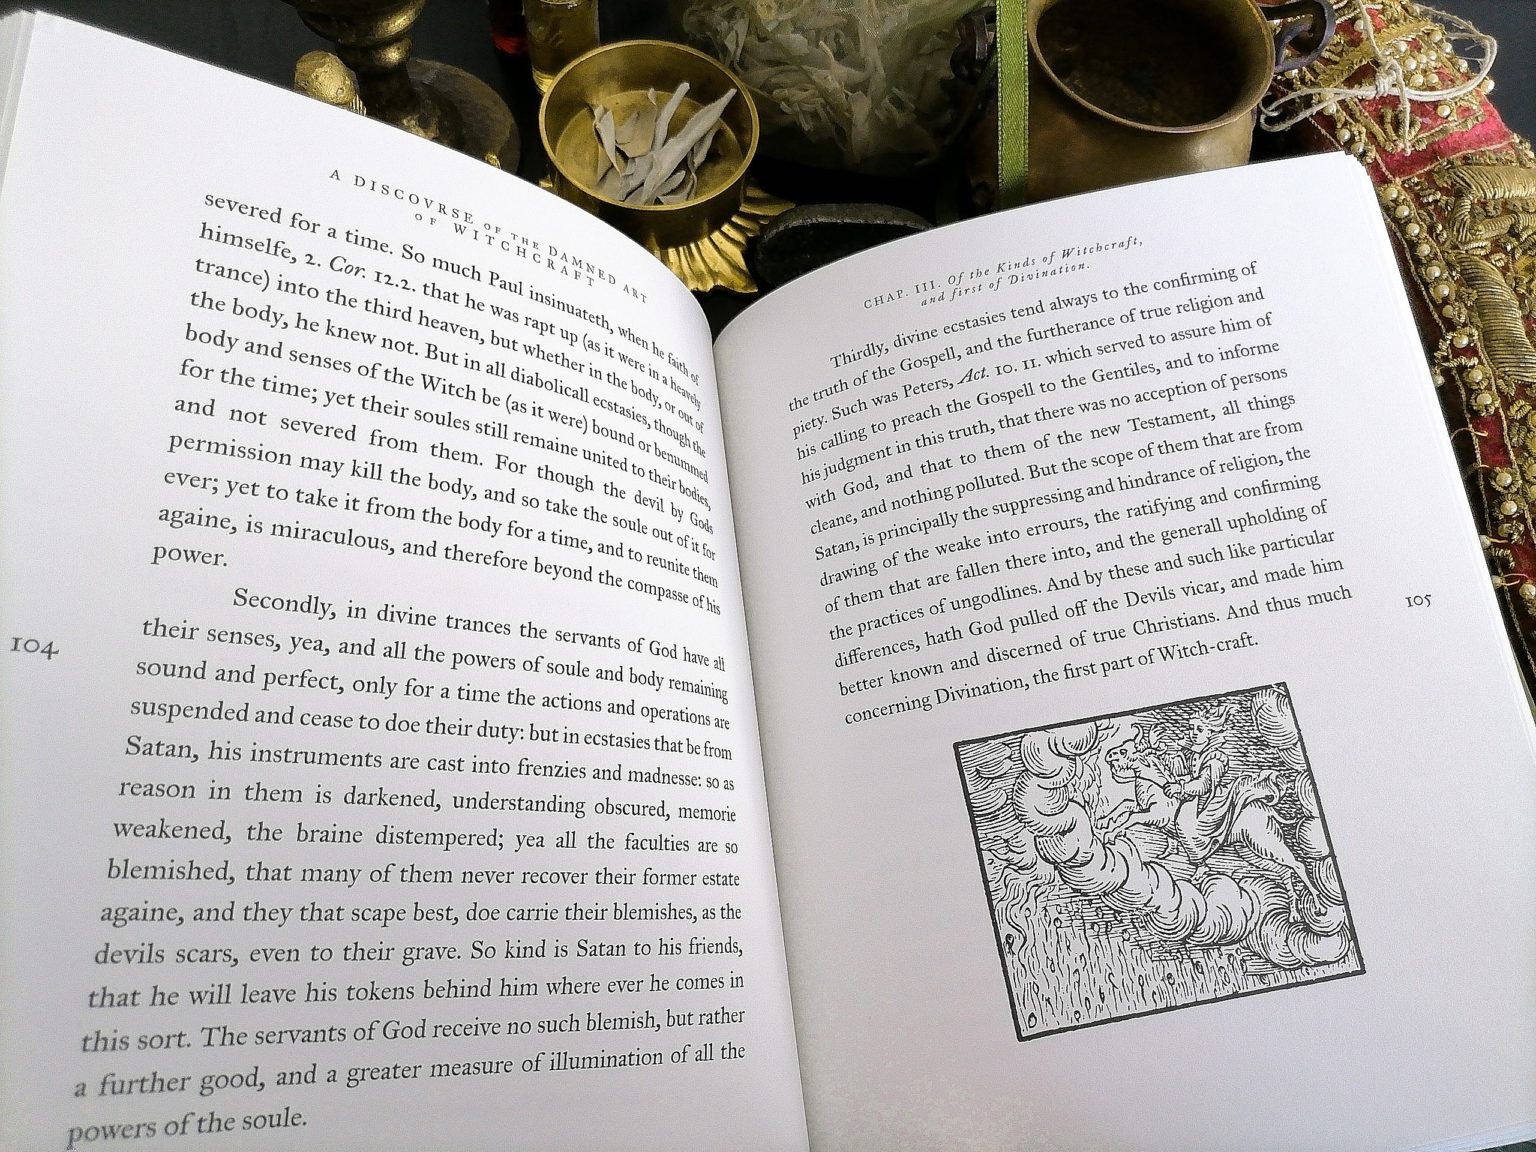 A Discourse of the Damned Art of Witchcraft – Hexenhammer Books